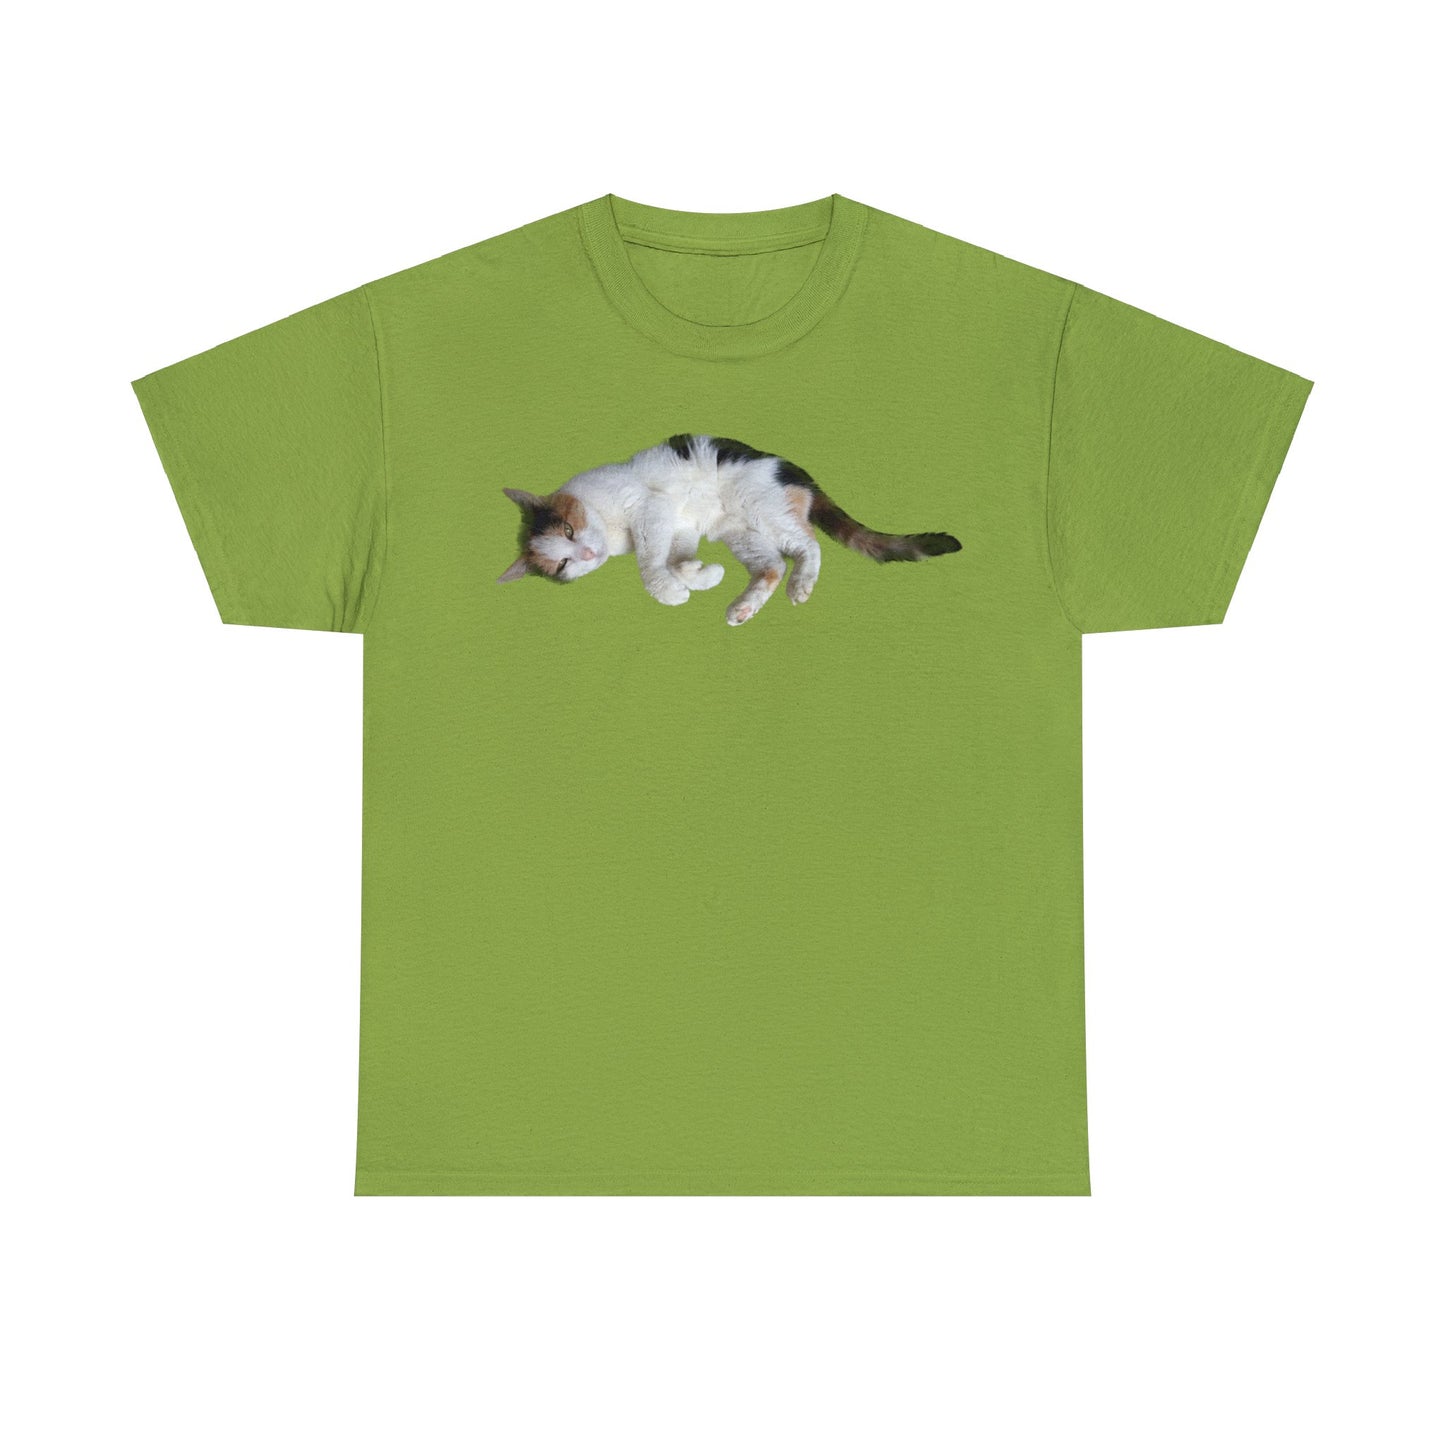 Snoozing Calico Cat Shirt, Cat T Shirt For Cat Person, Gift For Cat Mom, Cute Cat Gift, Kitten T Shirt